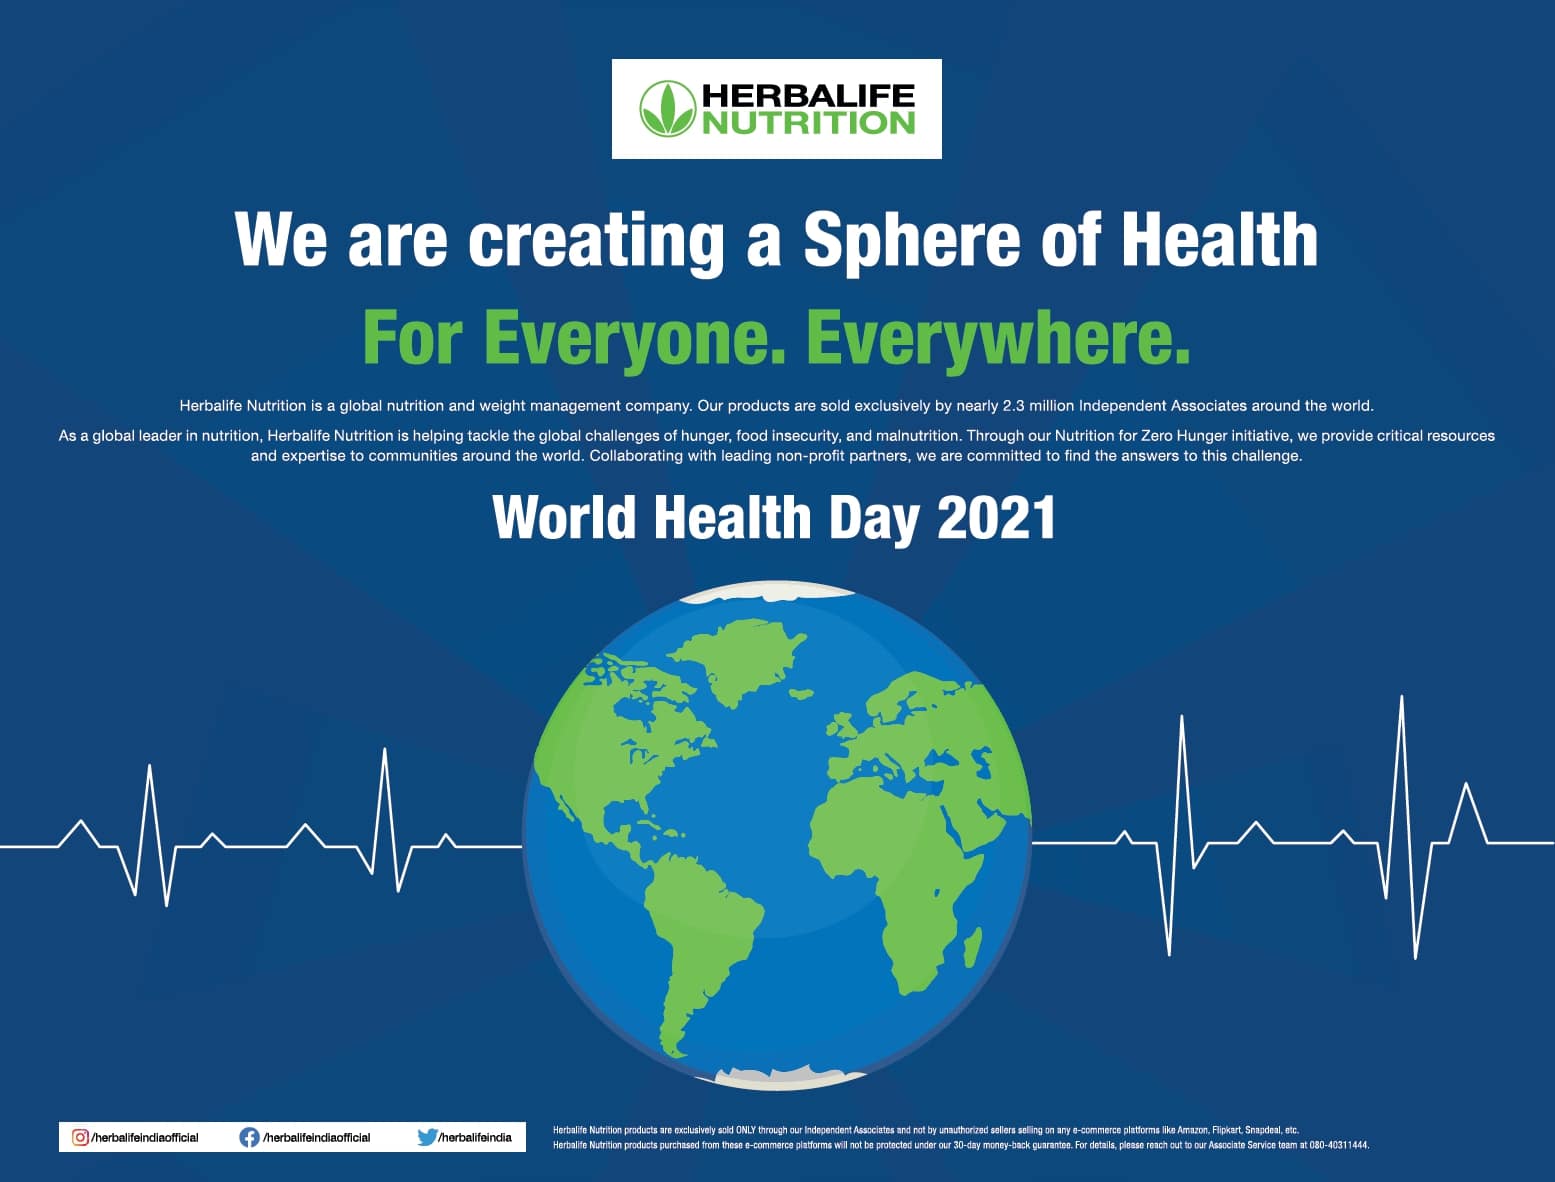 herbalife-nutrition-we-are-creating-a-sphere-of-health-for-every-one-everywhere-world-health-day-2021-ad-times-of-india-mumbai-07-04-2021